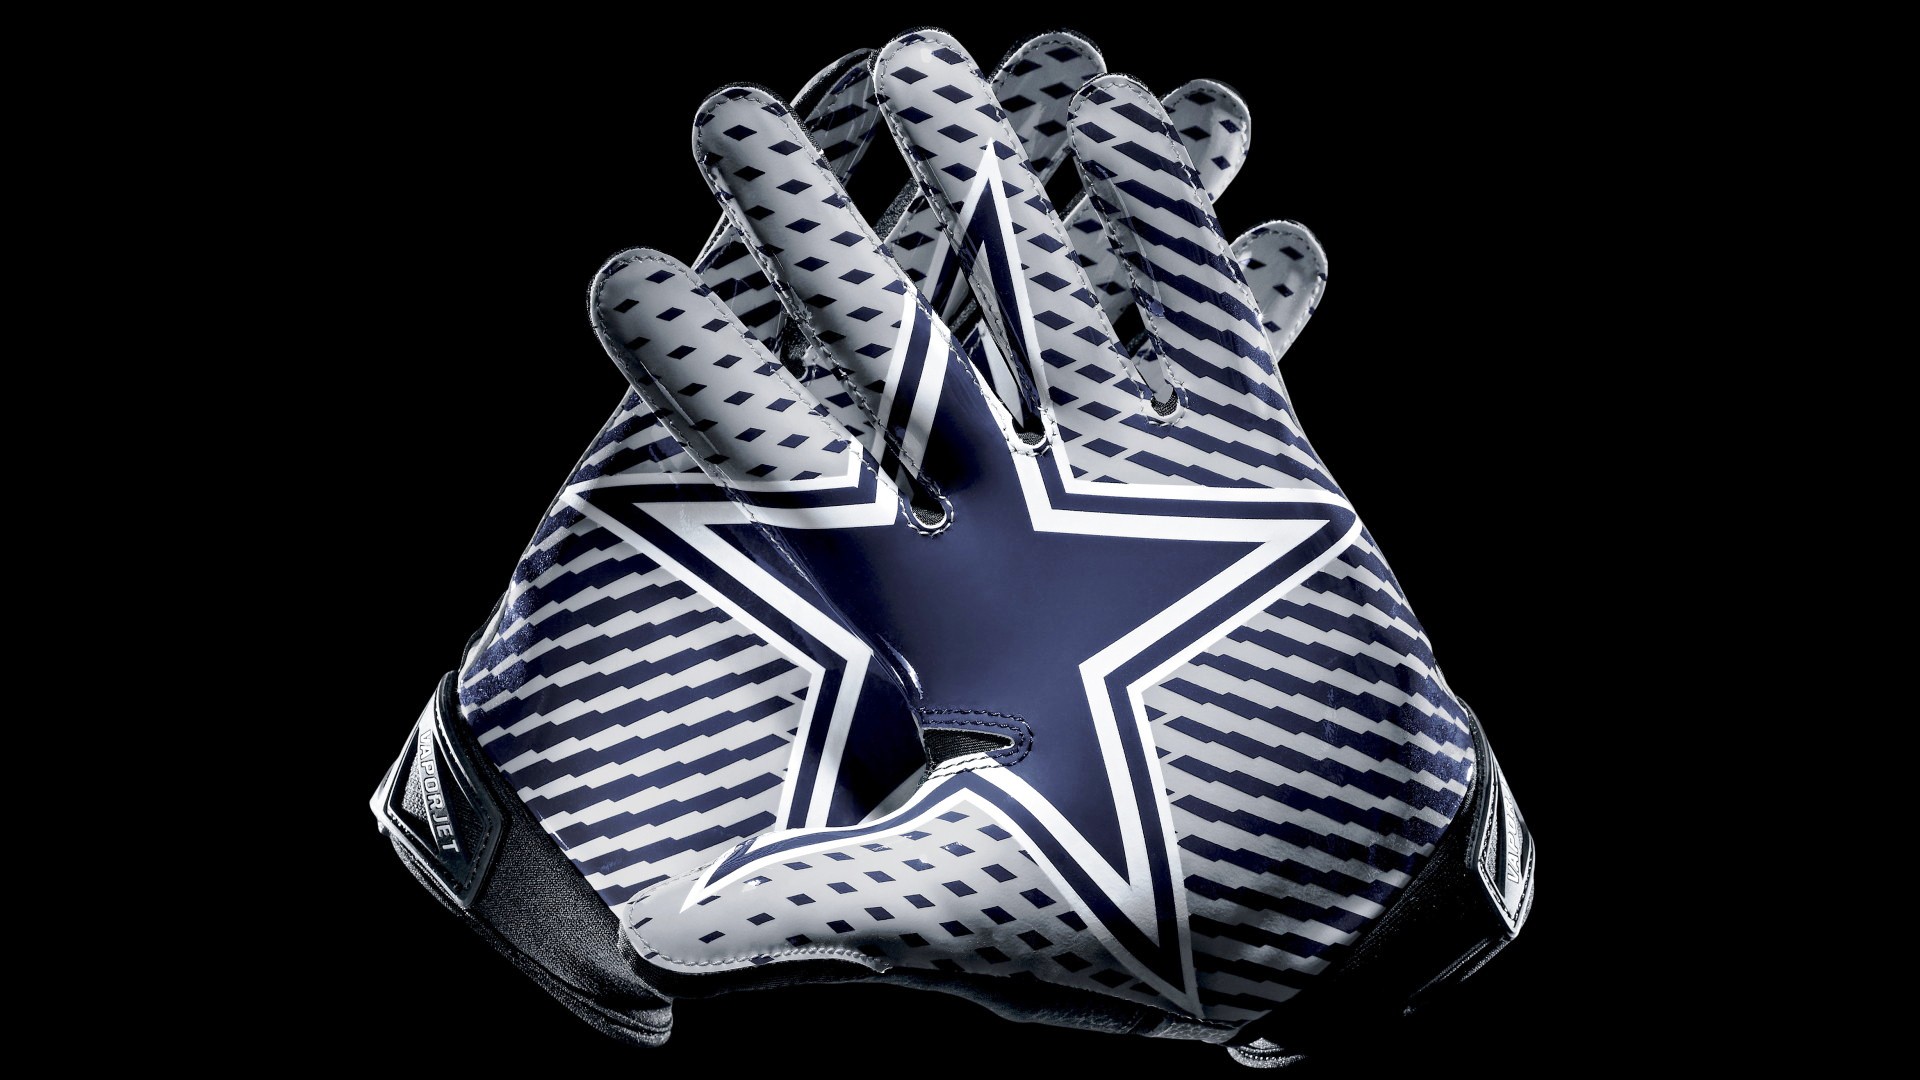 Best Dallas Cowboys Wallpaper with high-resolution 1920x1080 pixel. You can use and set as wallpaper for Notebook Screensavers, Mac Wallpapers, Mobile Home Screen, iPhone or Android Phones Lock Screen